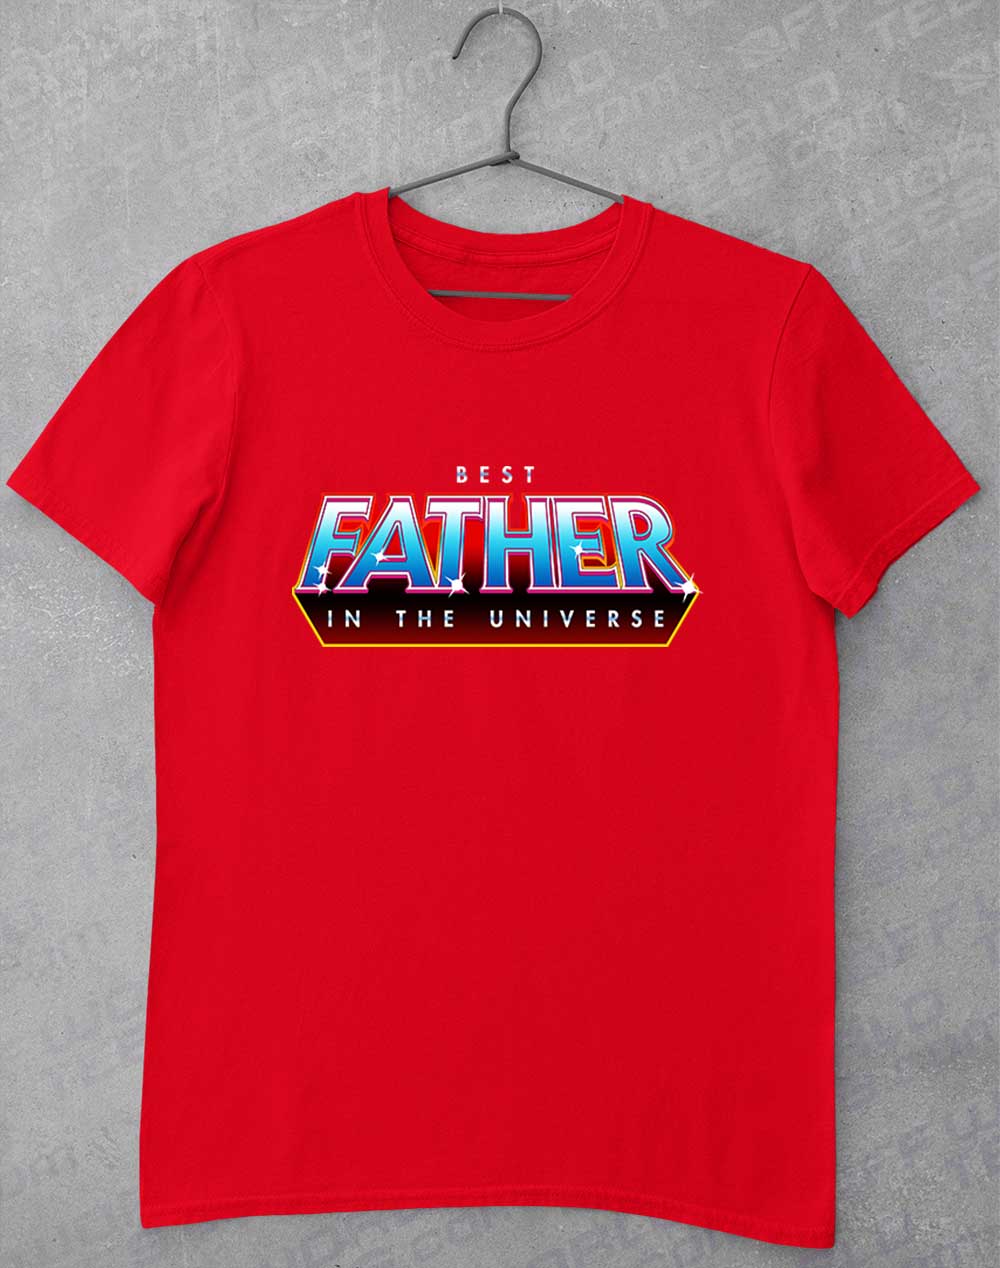 Red - Best Father in the Universe T-Shirt